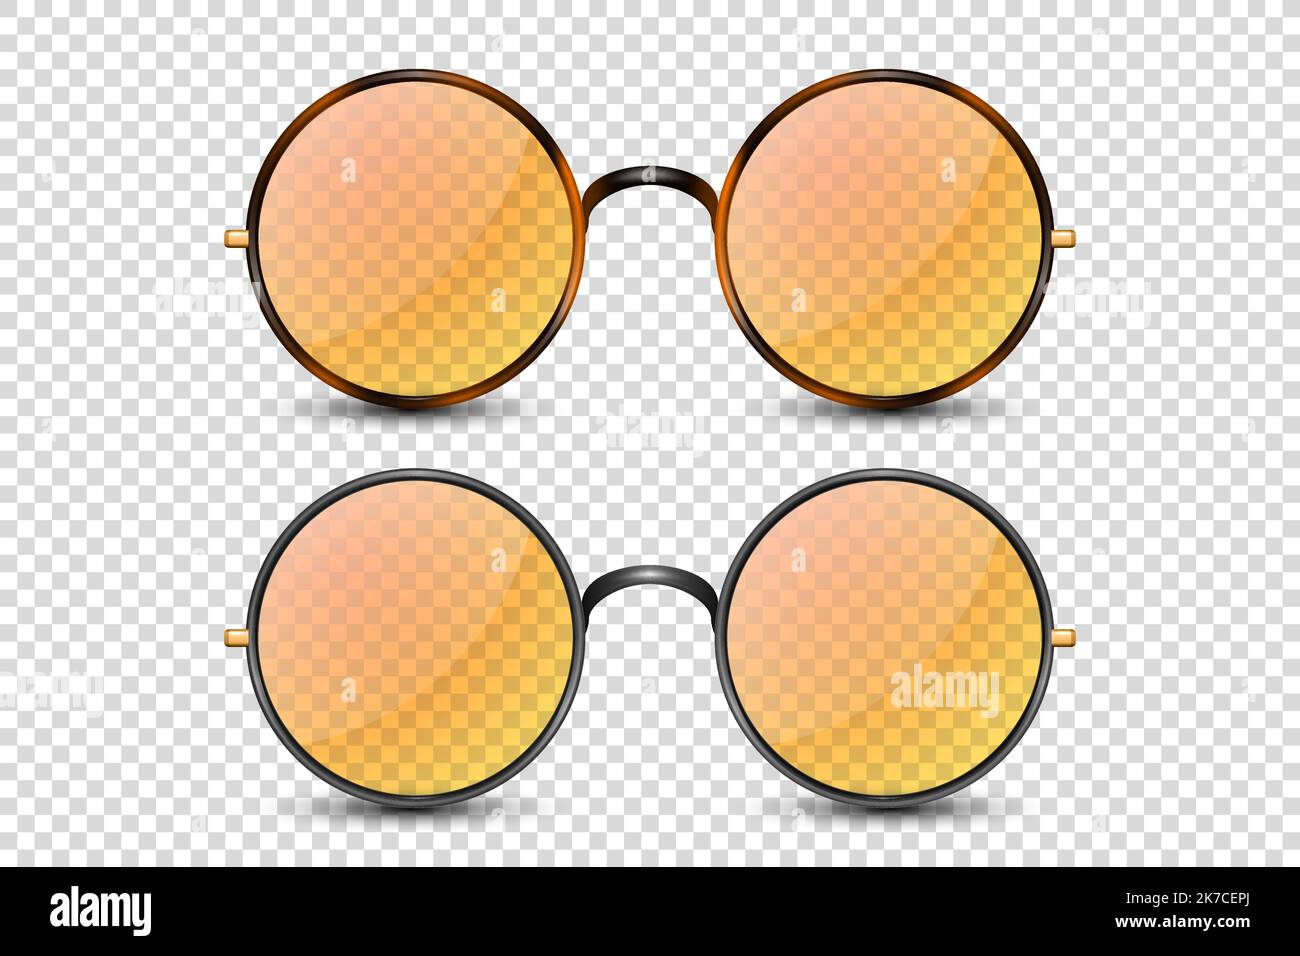 Vector 3d Realistic Leopard, Black Round Frame Glasses Set with Orange Transparent Glass Isolated, Eyeglasses for Women and Men, Accessory. Optics Stock Vector